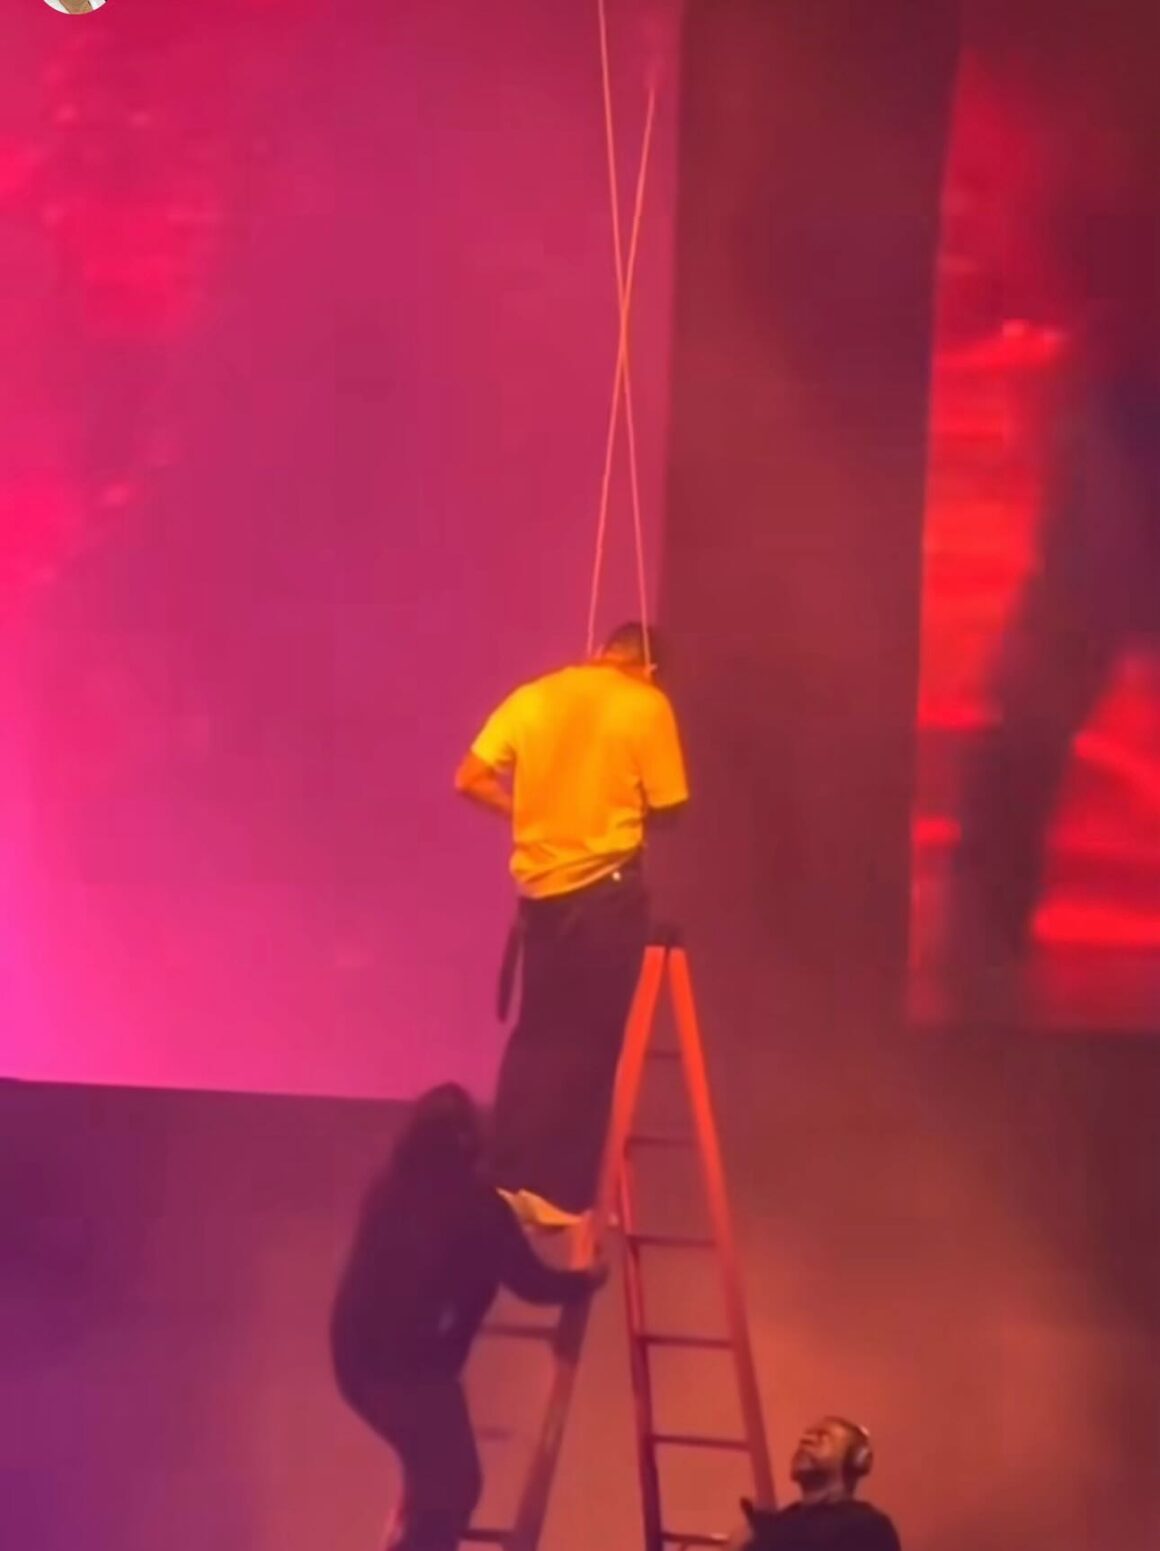 Chris Brown gets stuck suspended in the air during concert